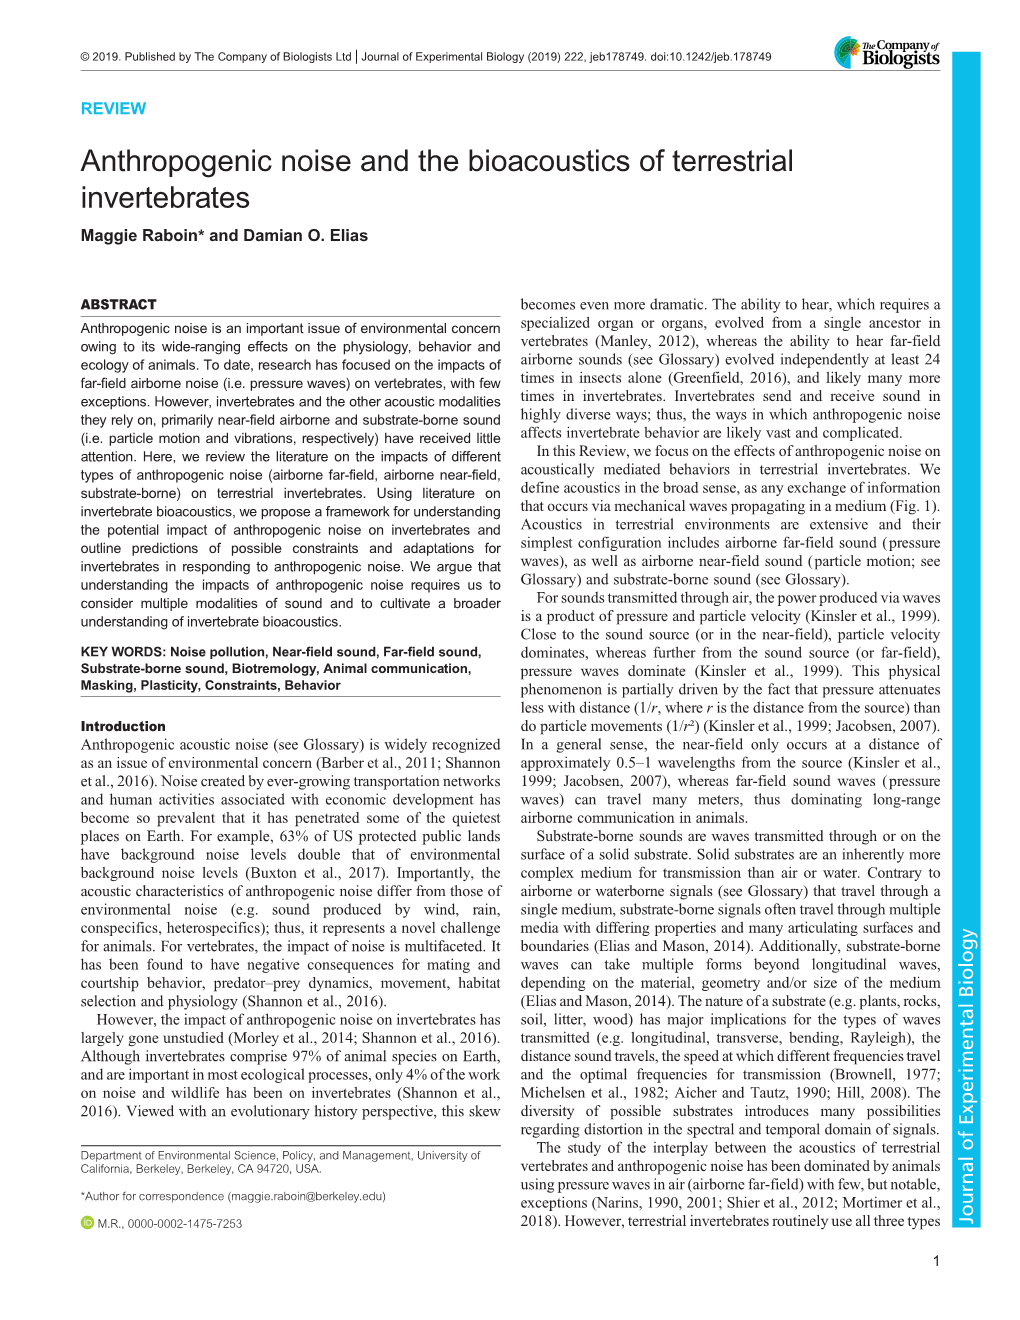 Anthropogenic Noise and the Bioacoustics of Terrestrial Invertebrates Maggie Raboin* and Damian O